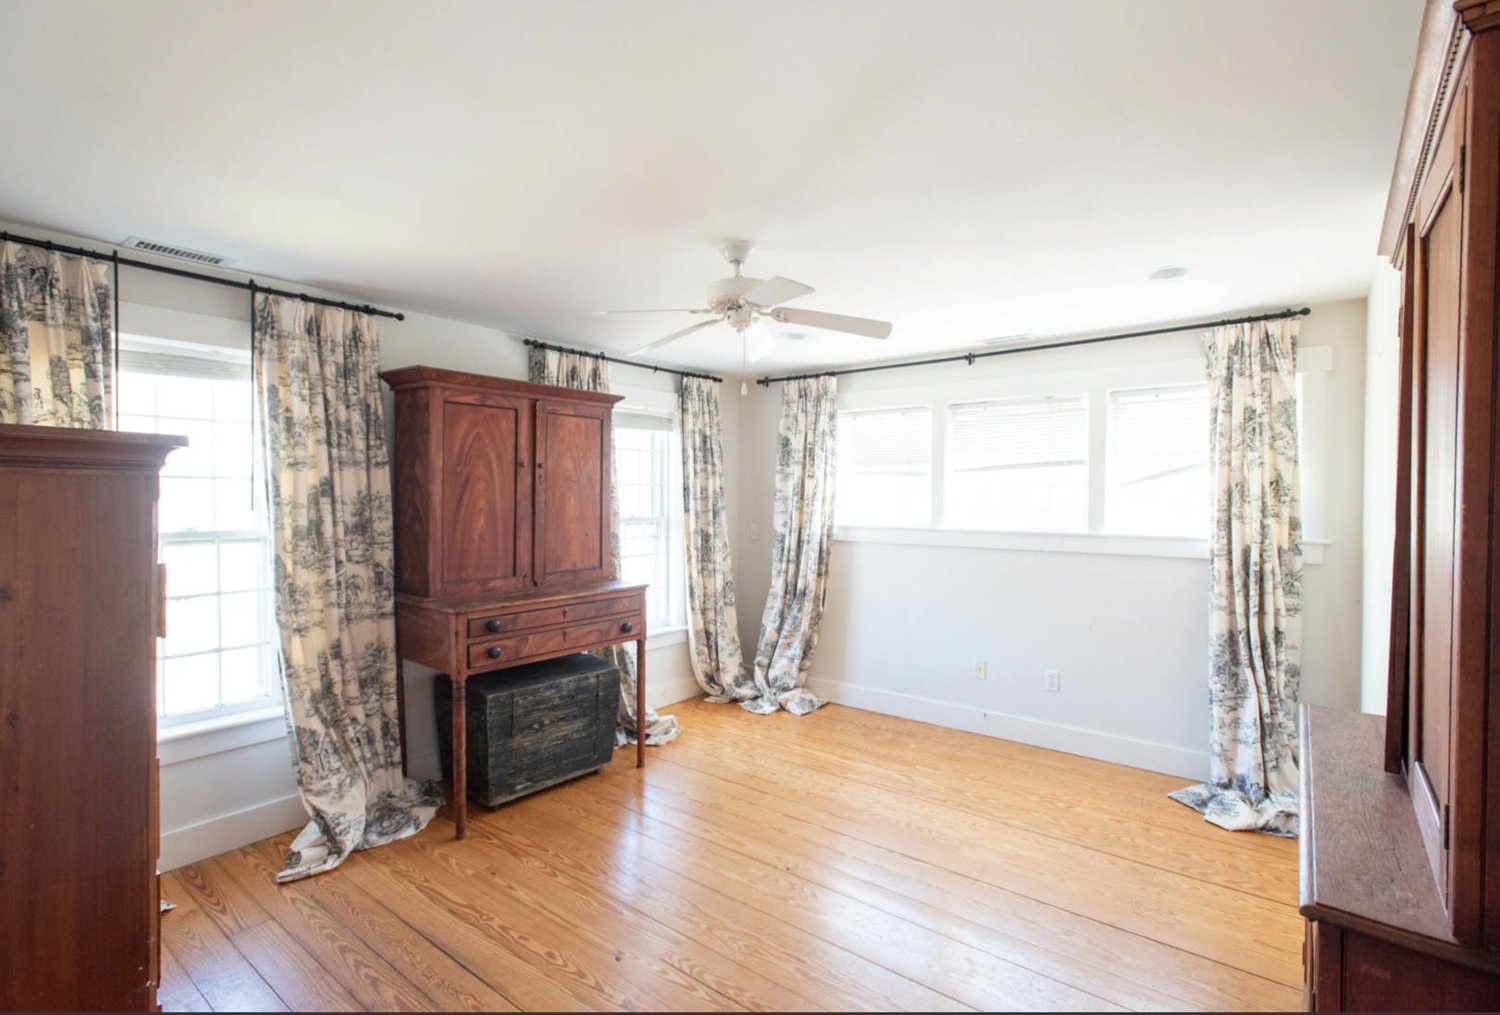 The bright and airy rooms have wood floors and multiple windows.